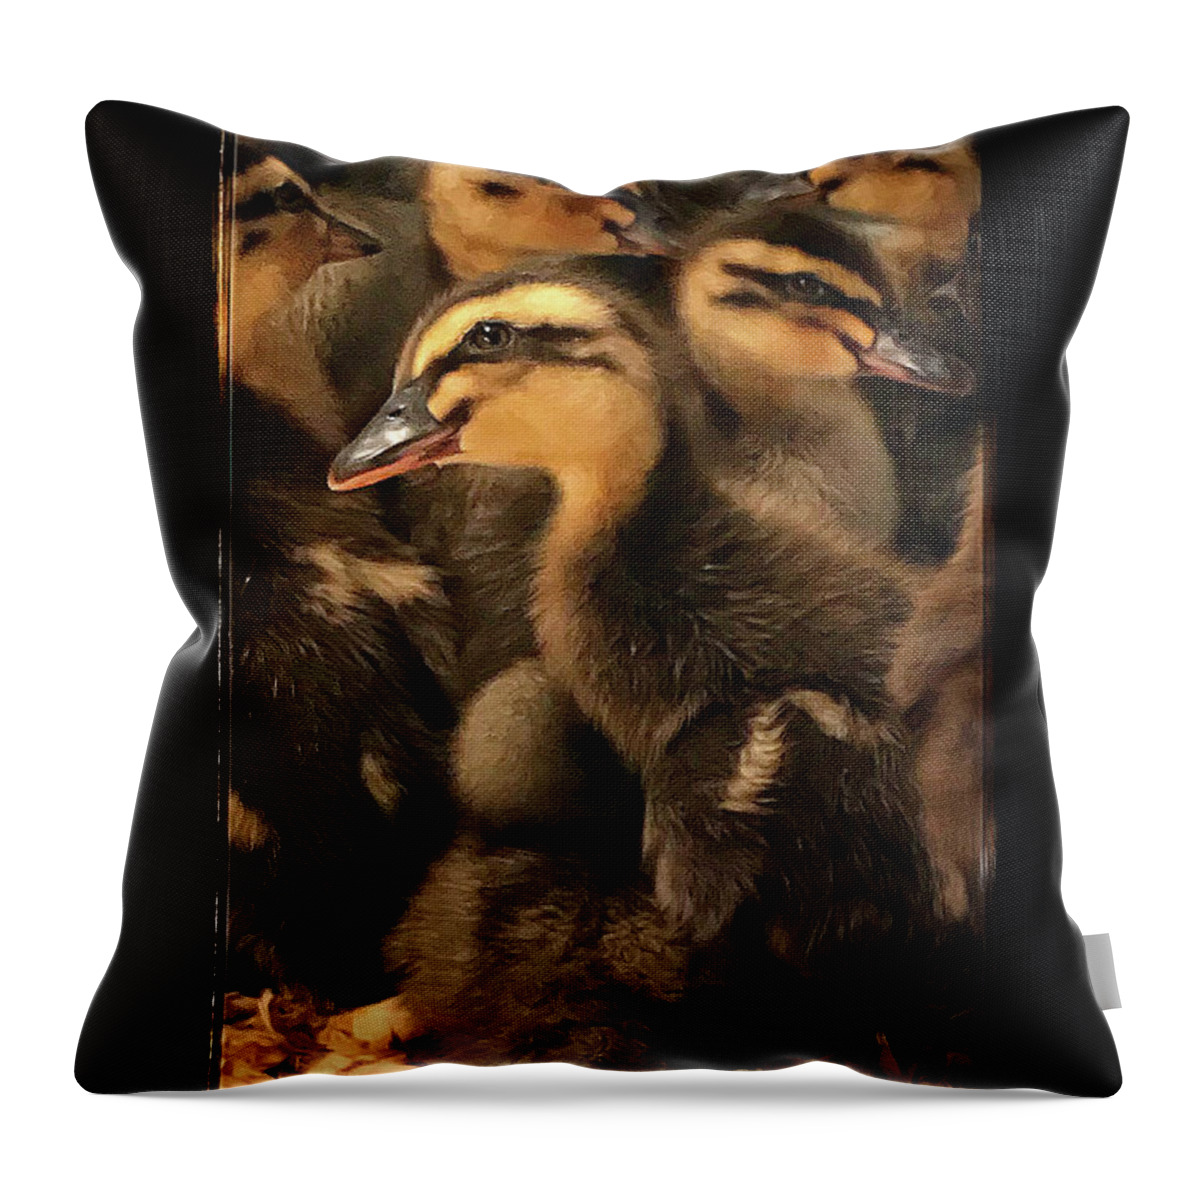 Ducklings Throw Pillow featuring the photograph Let's get together by Cheryl Birkhead